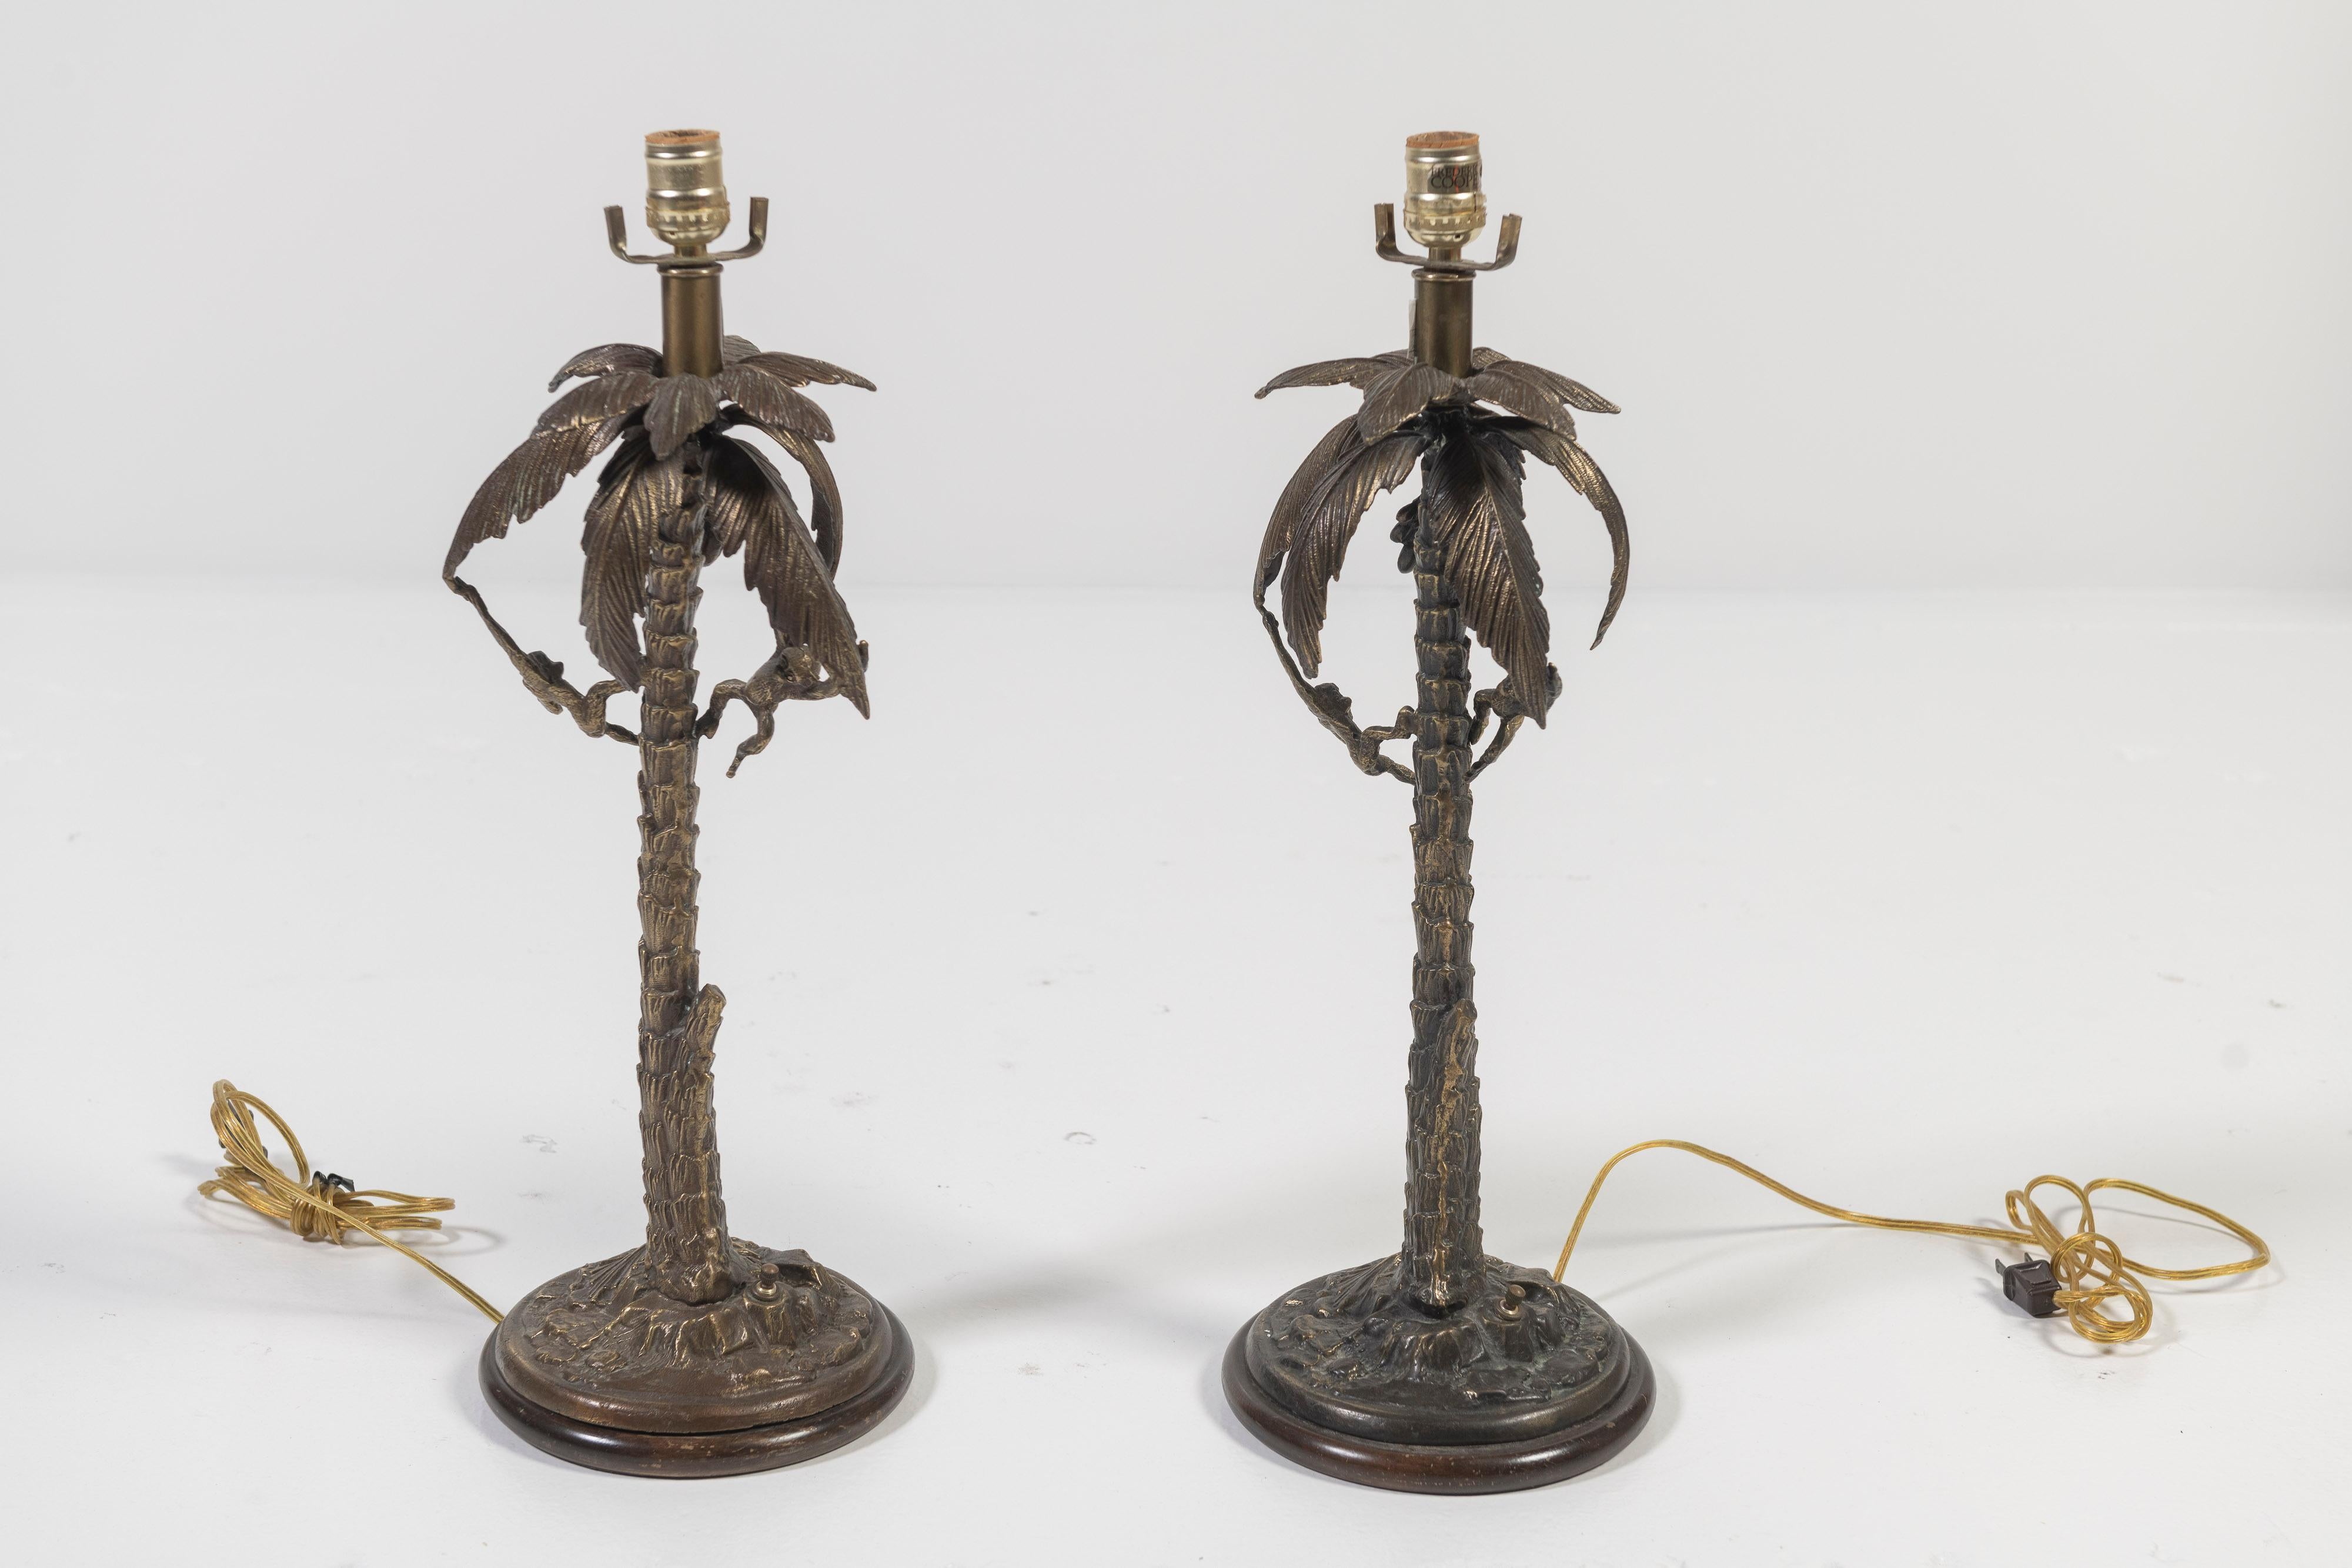 Pair of collectible vintage Frederick Cooper brass lamps of palm trees with hanging monkeys are enchanting and in great condition. Between mid-century modern, British Colonial and Caribbean styles, this pair is artistic and define casual hospitality